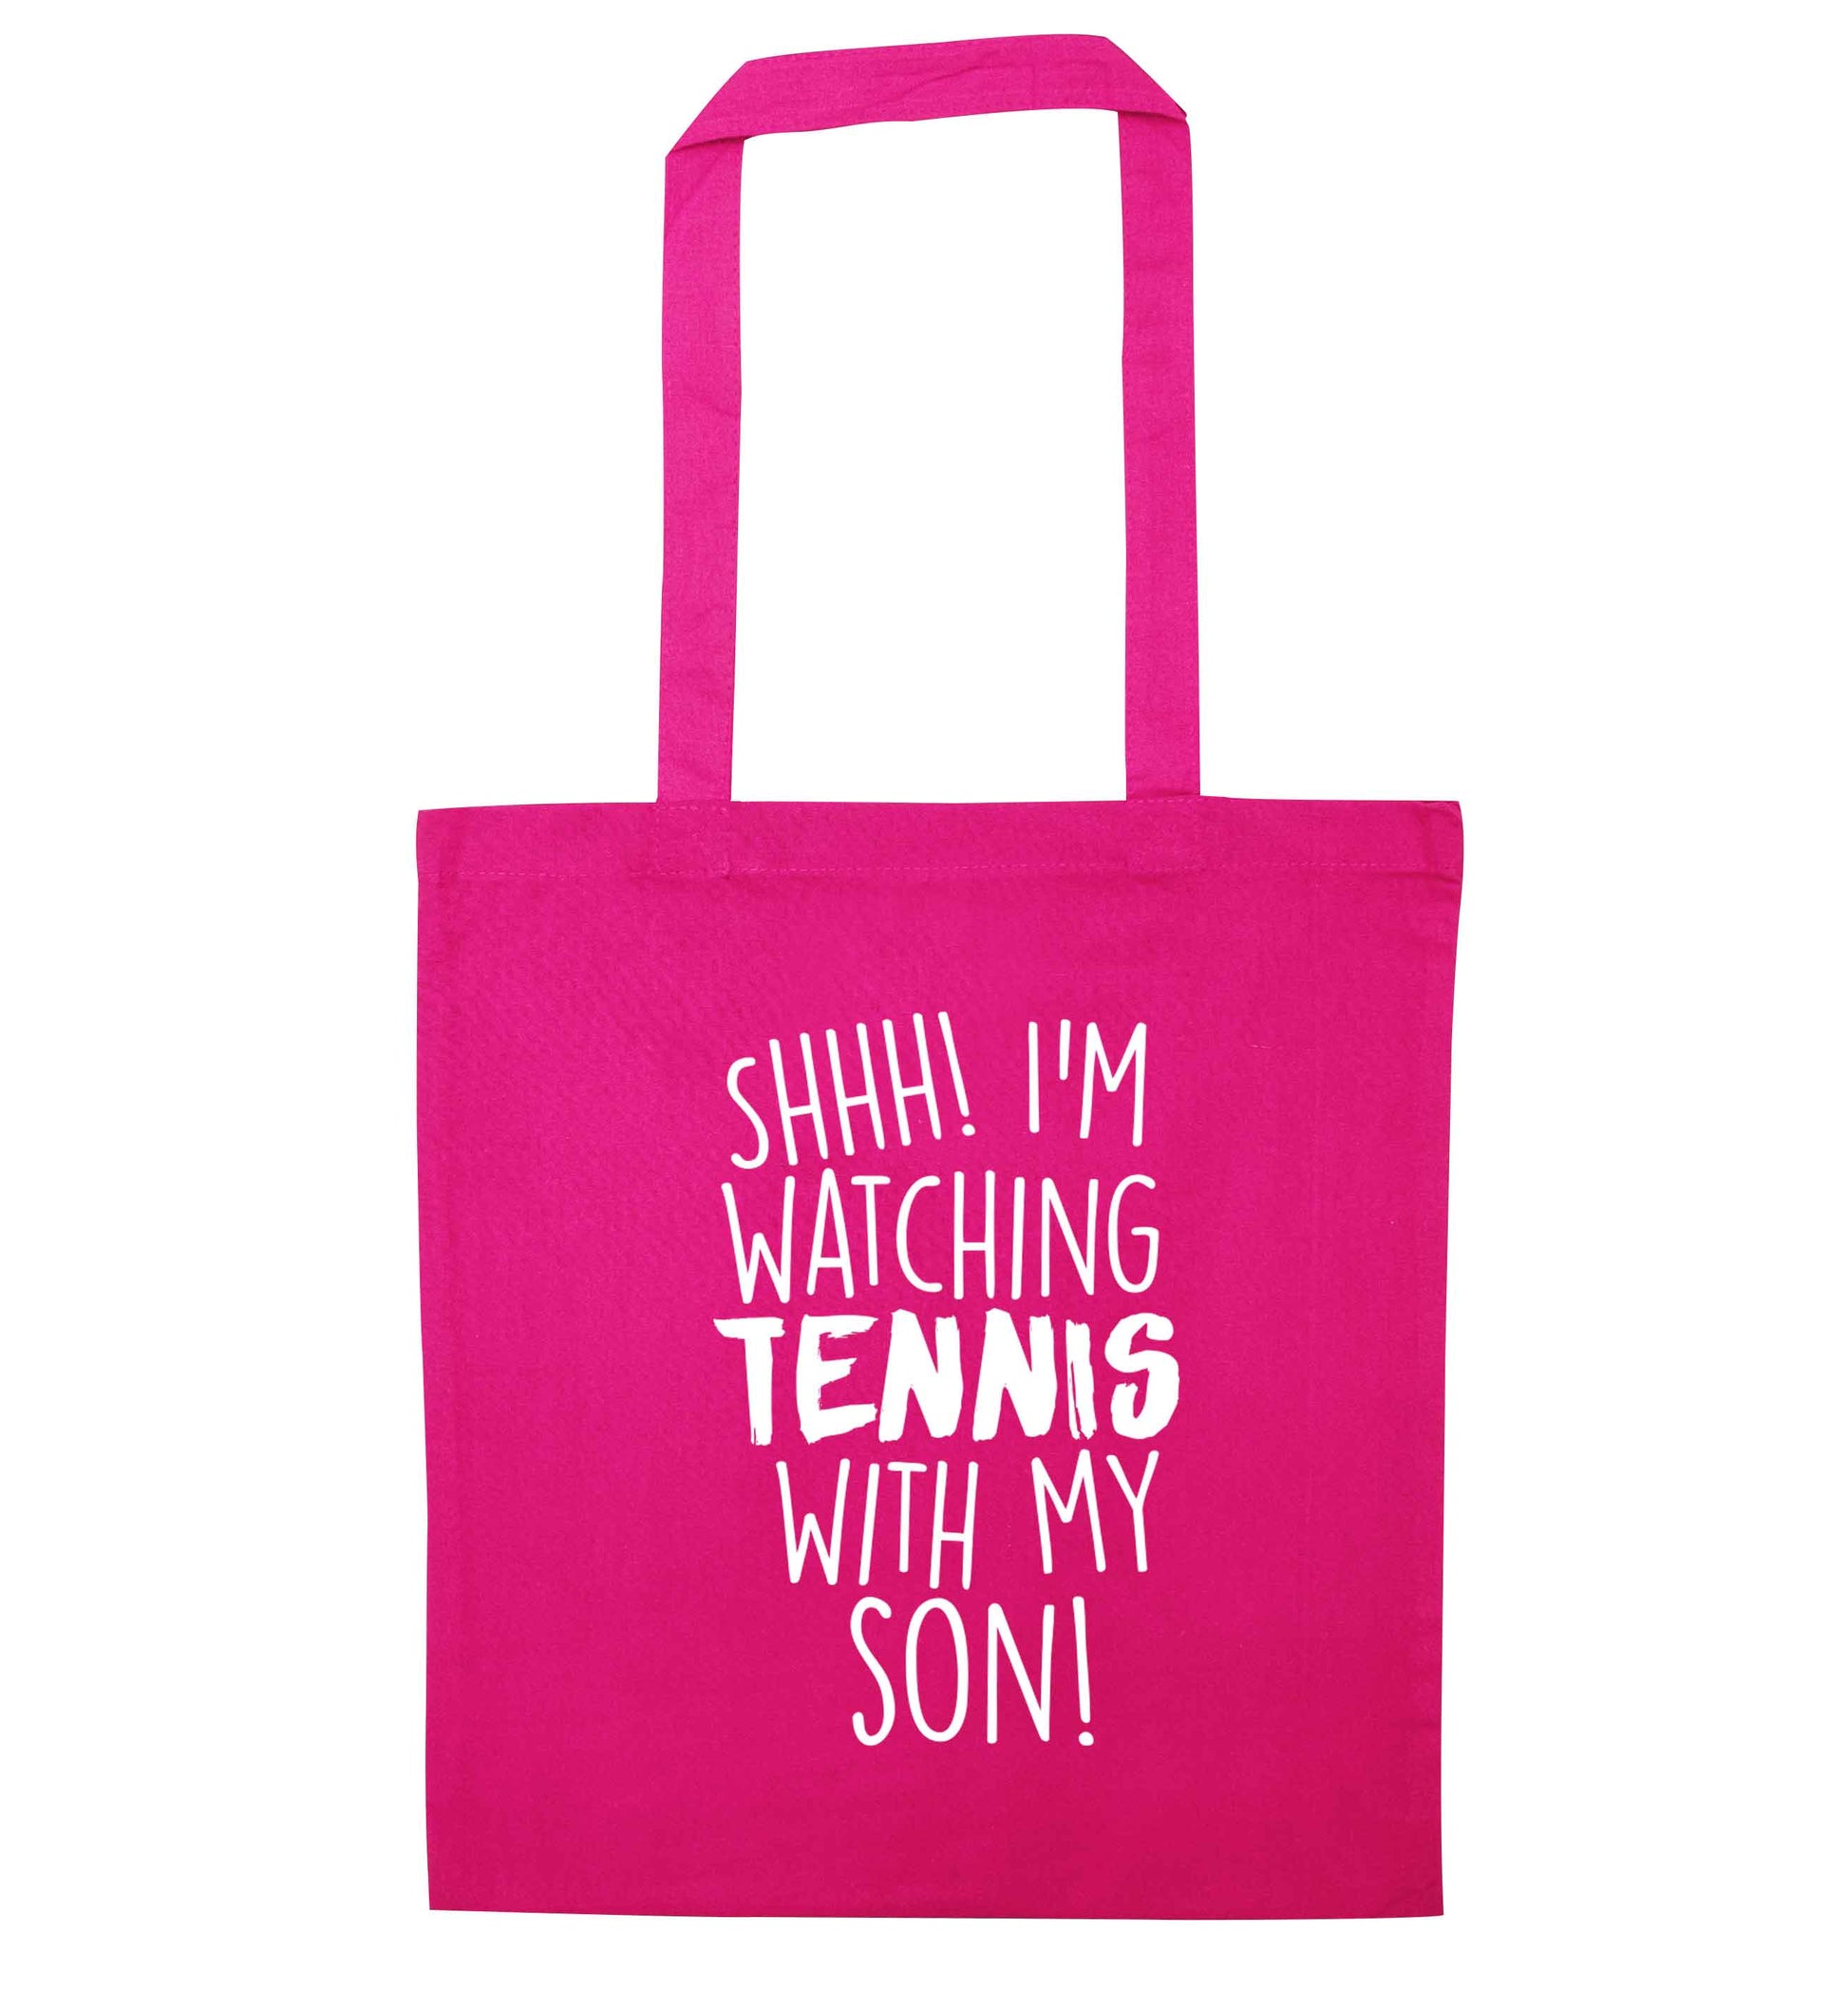 Shh! I'm watching tennis with my son! pink tote bag